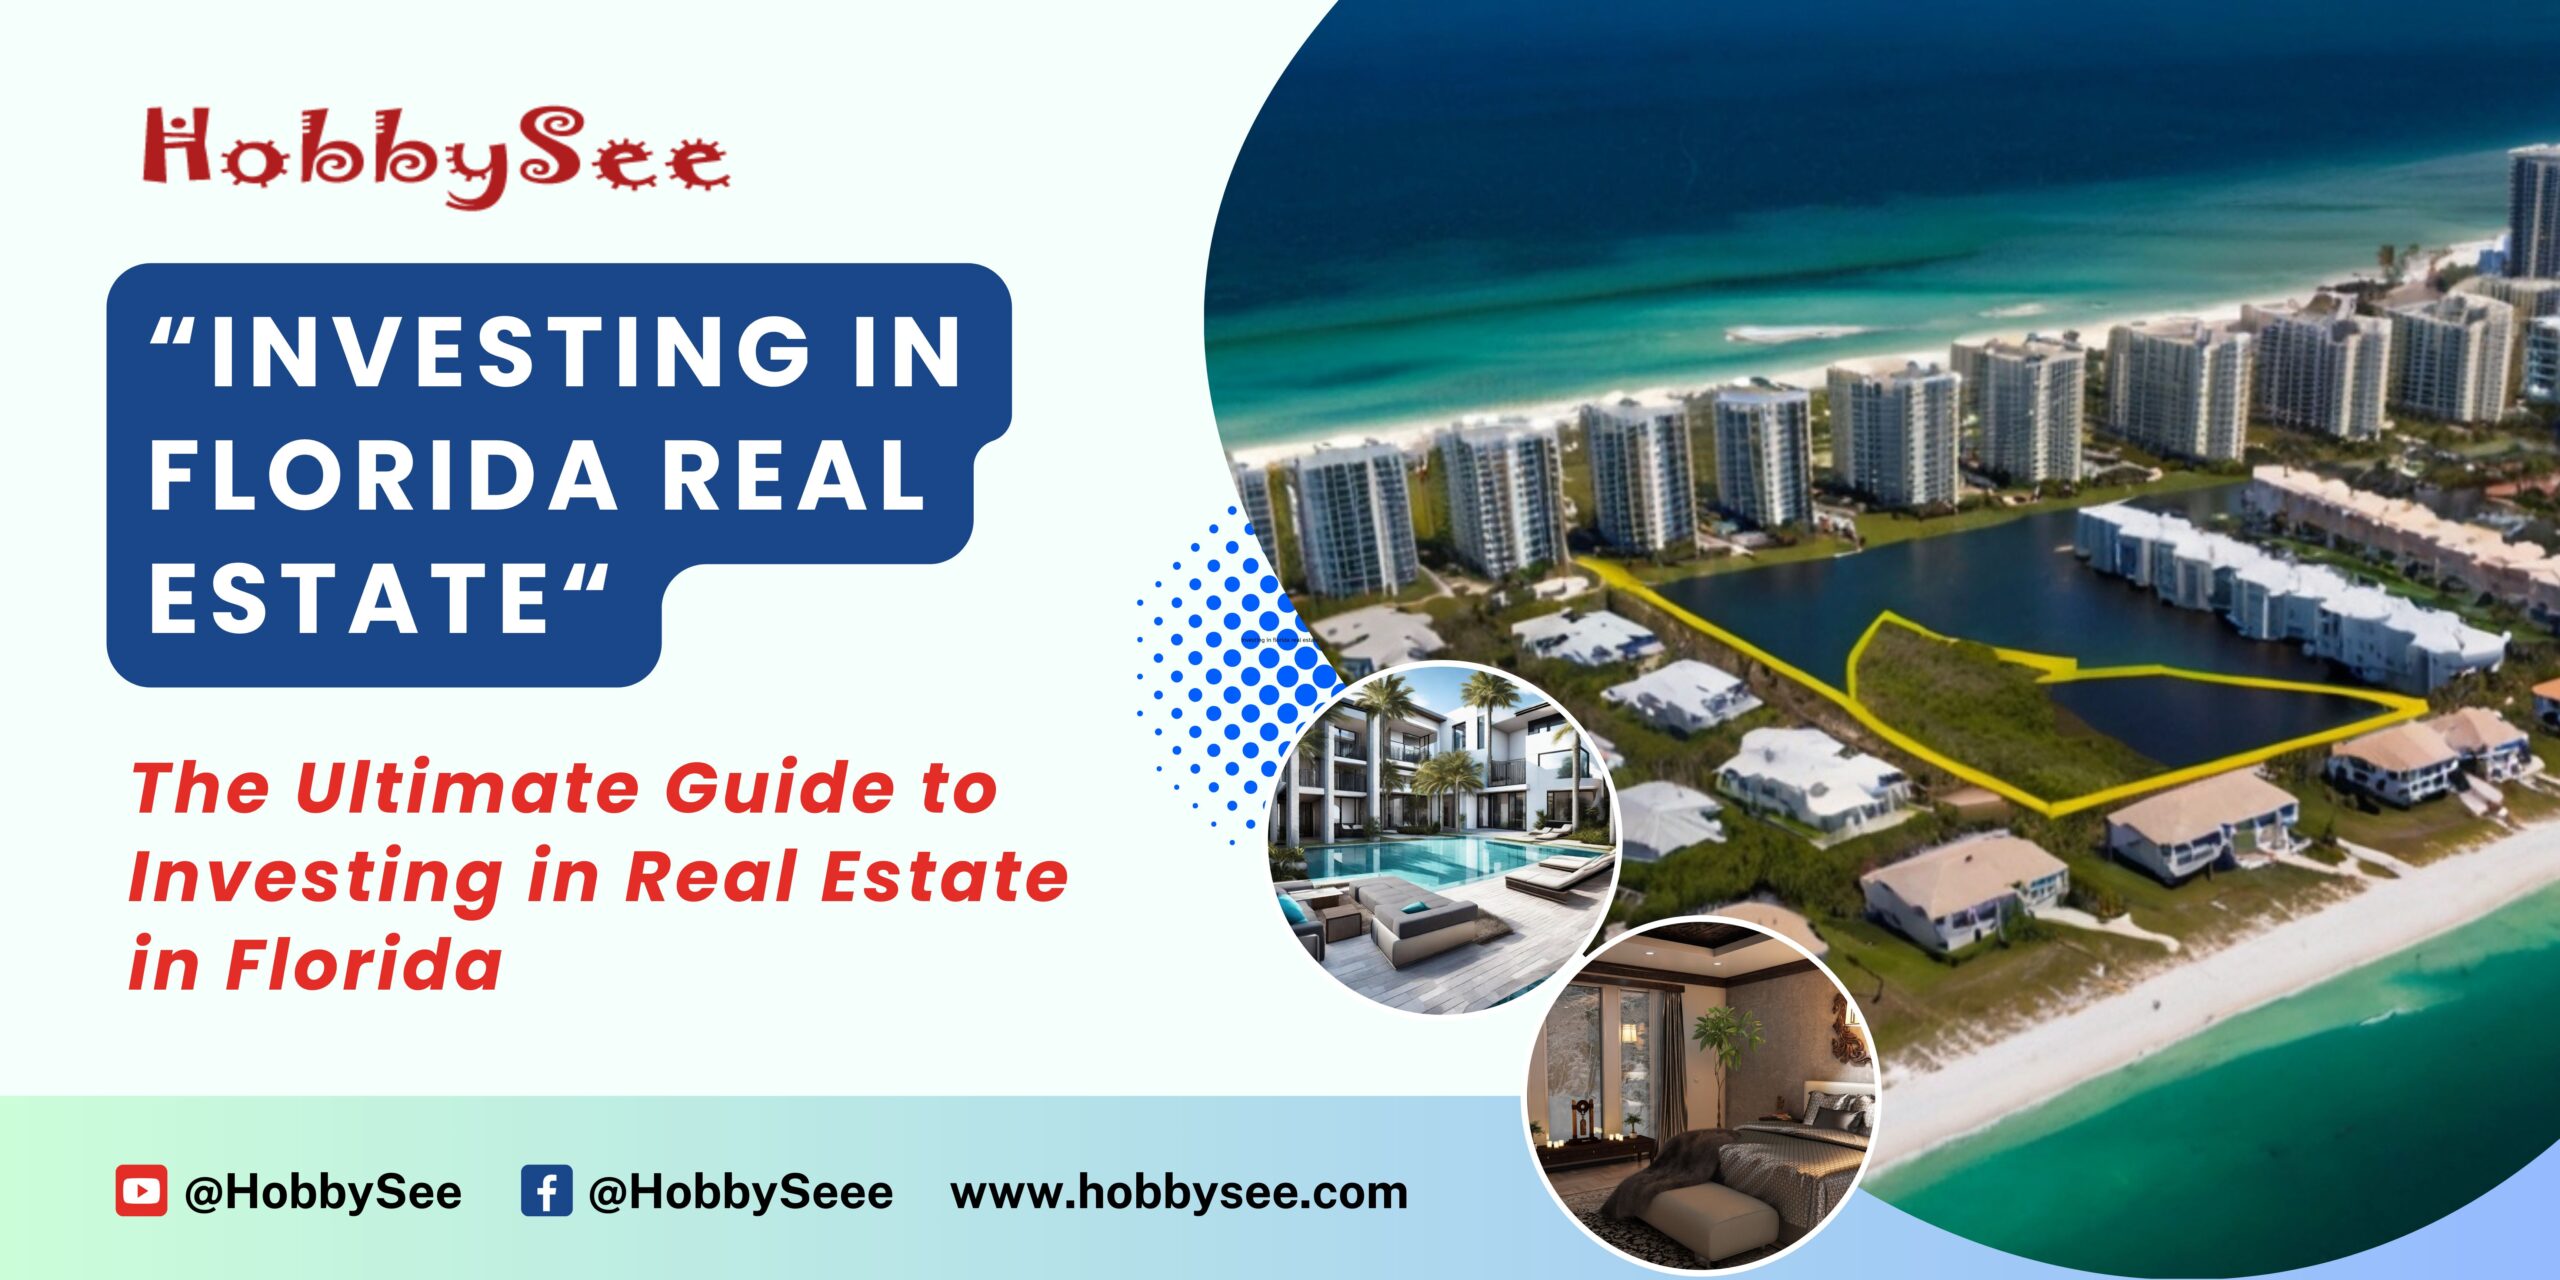 The Ultimate Guide to Investing in Real Estate in Florida - Hobbysee.com